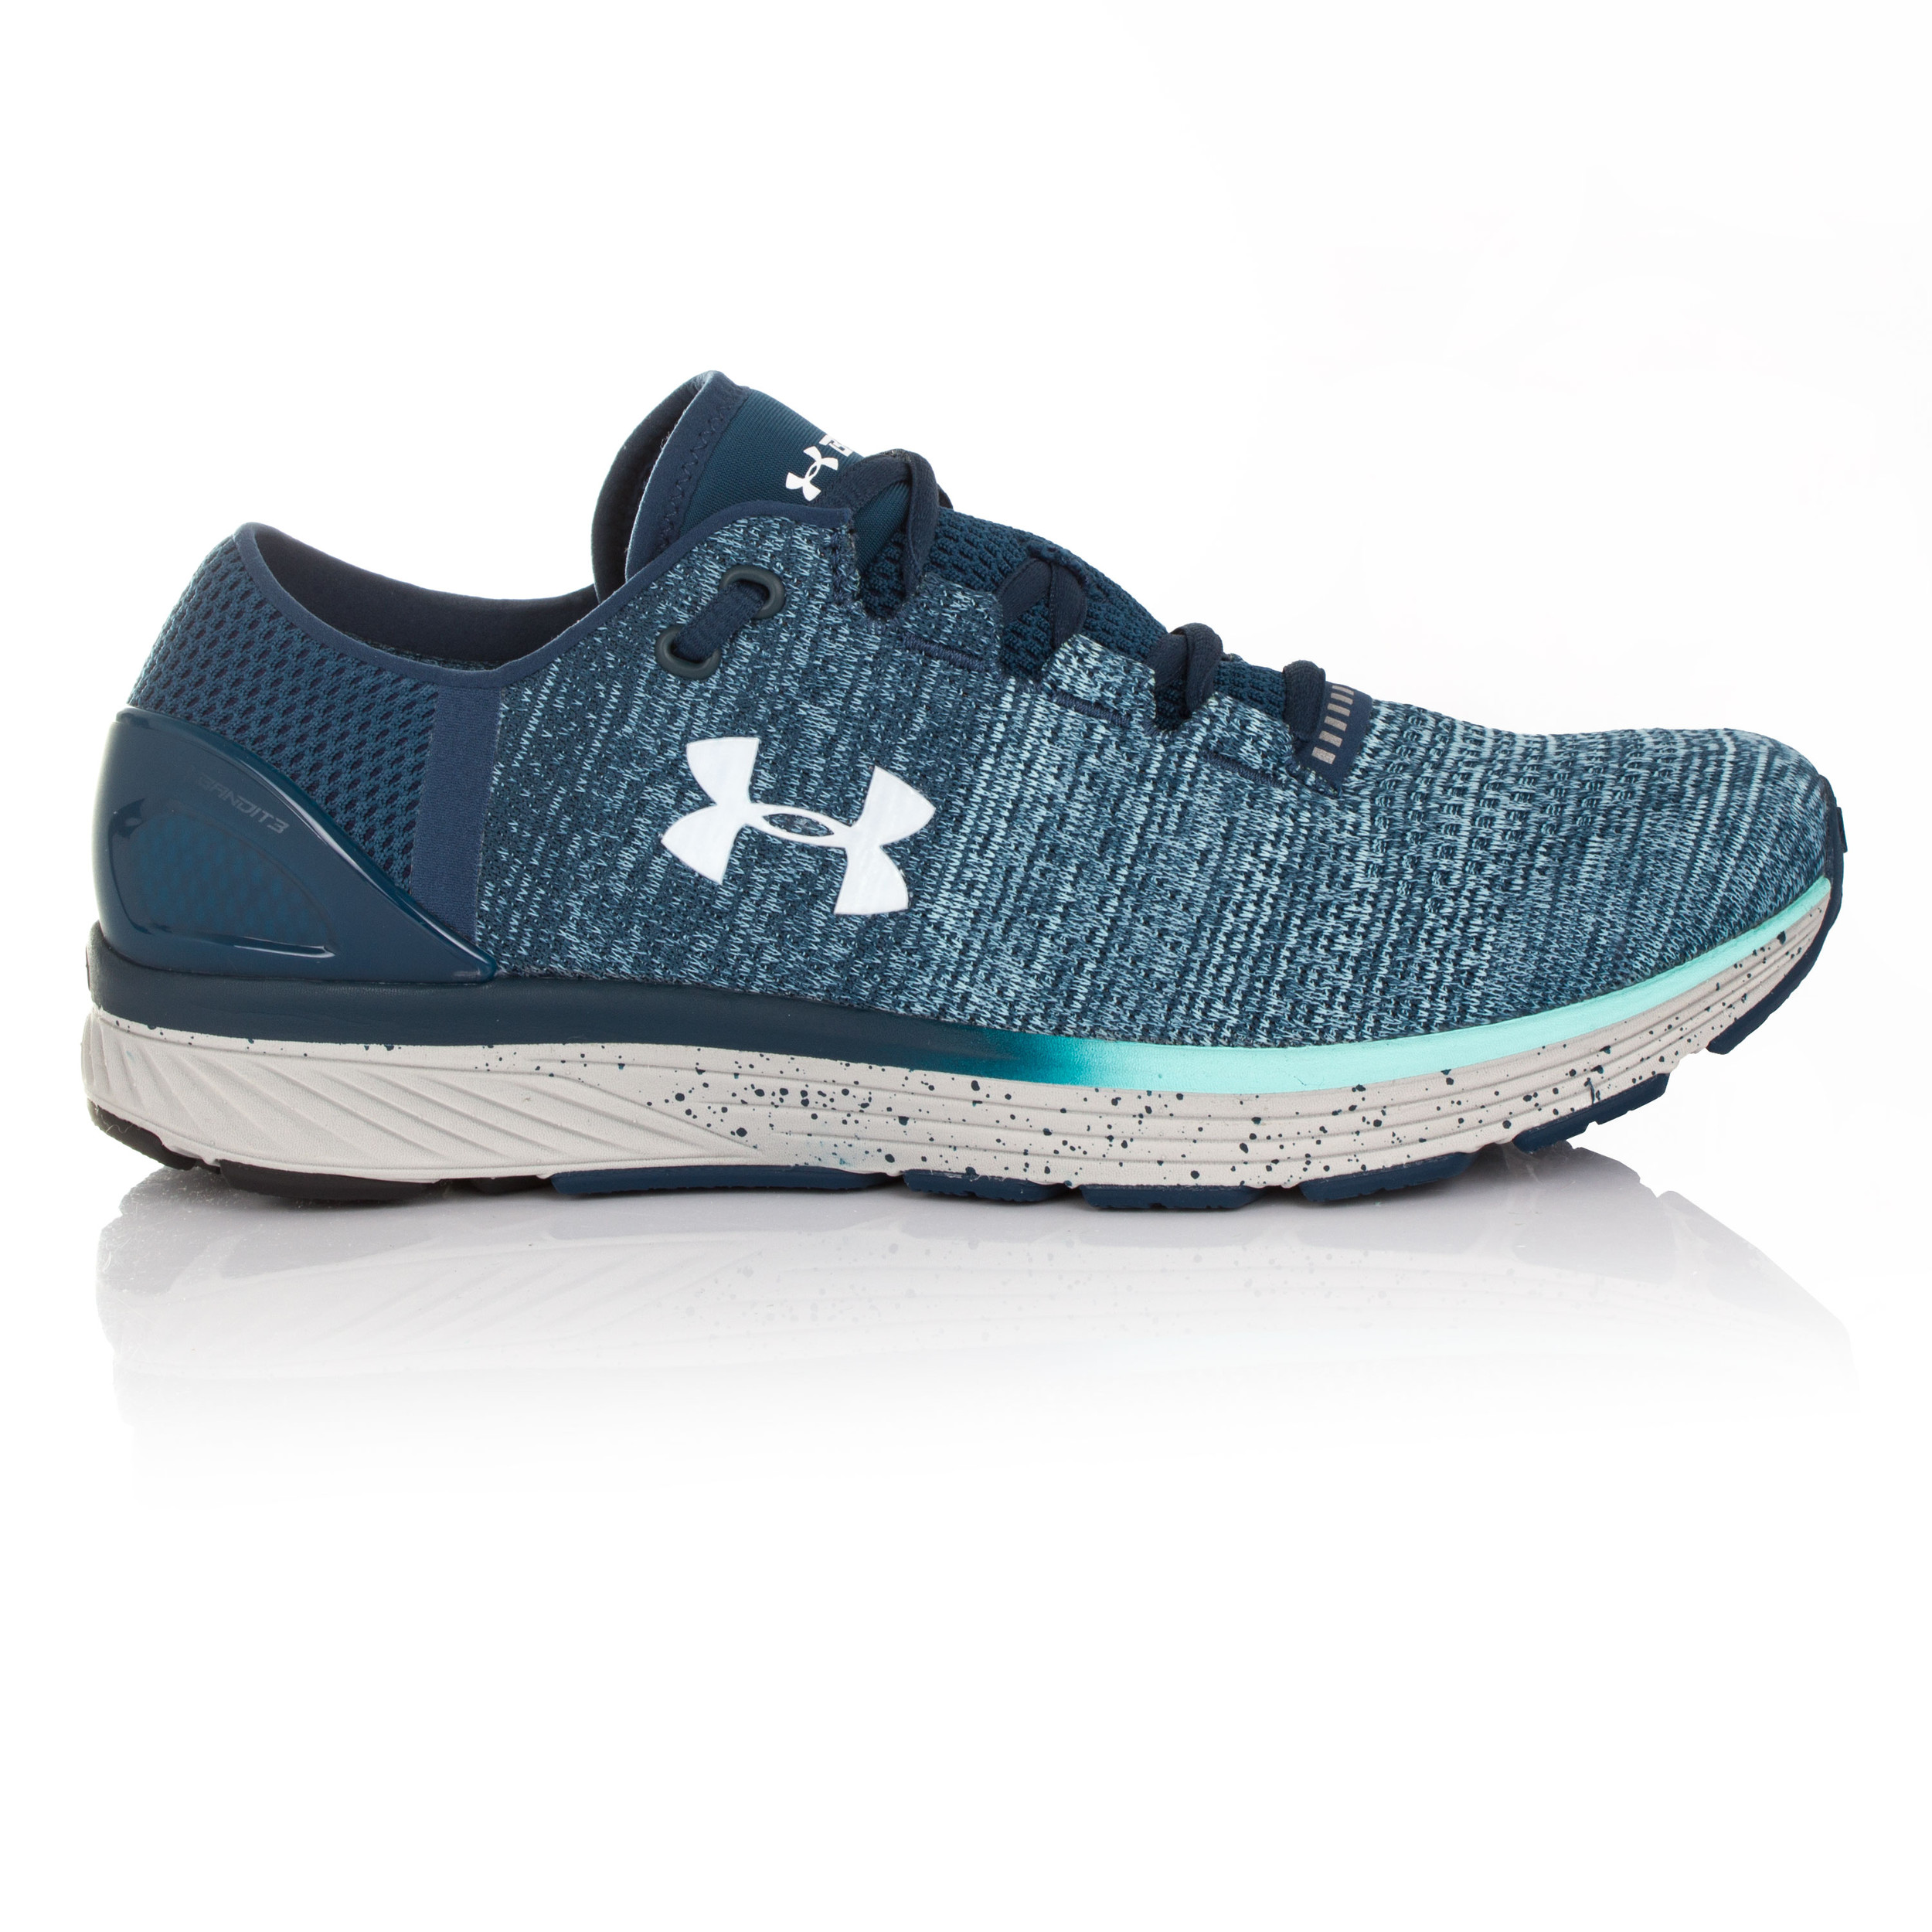 Under Armour Charged Bandit 3 Women's Running Shoes - AW17